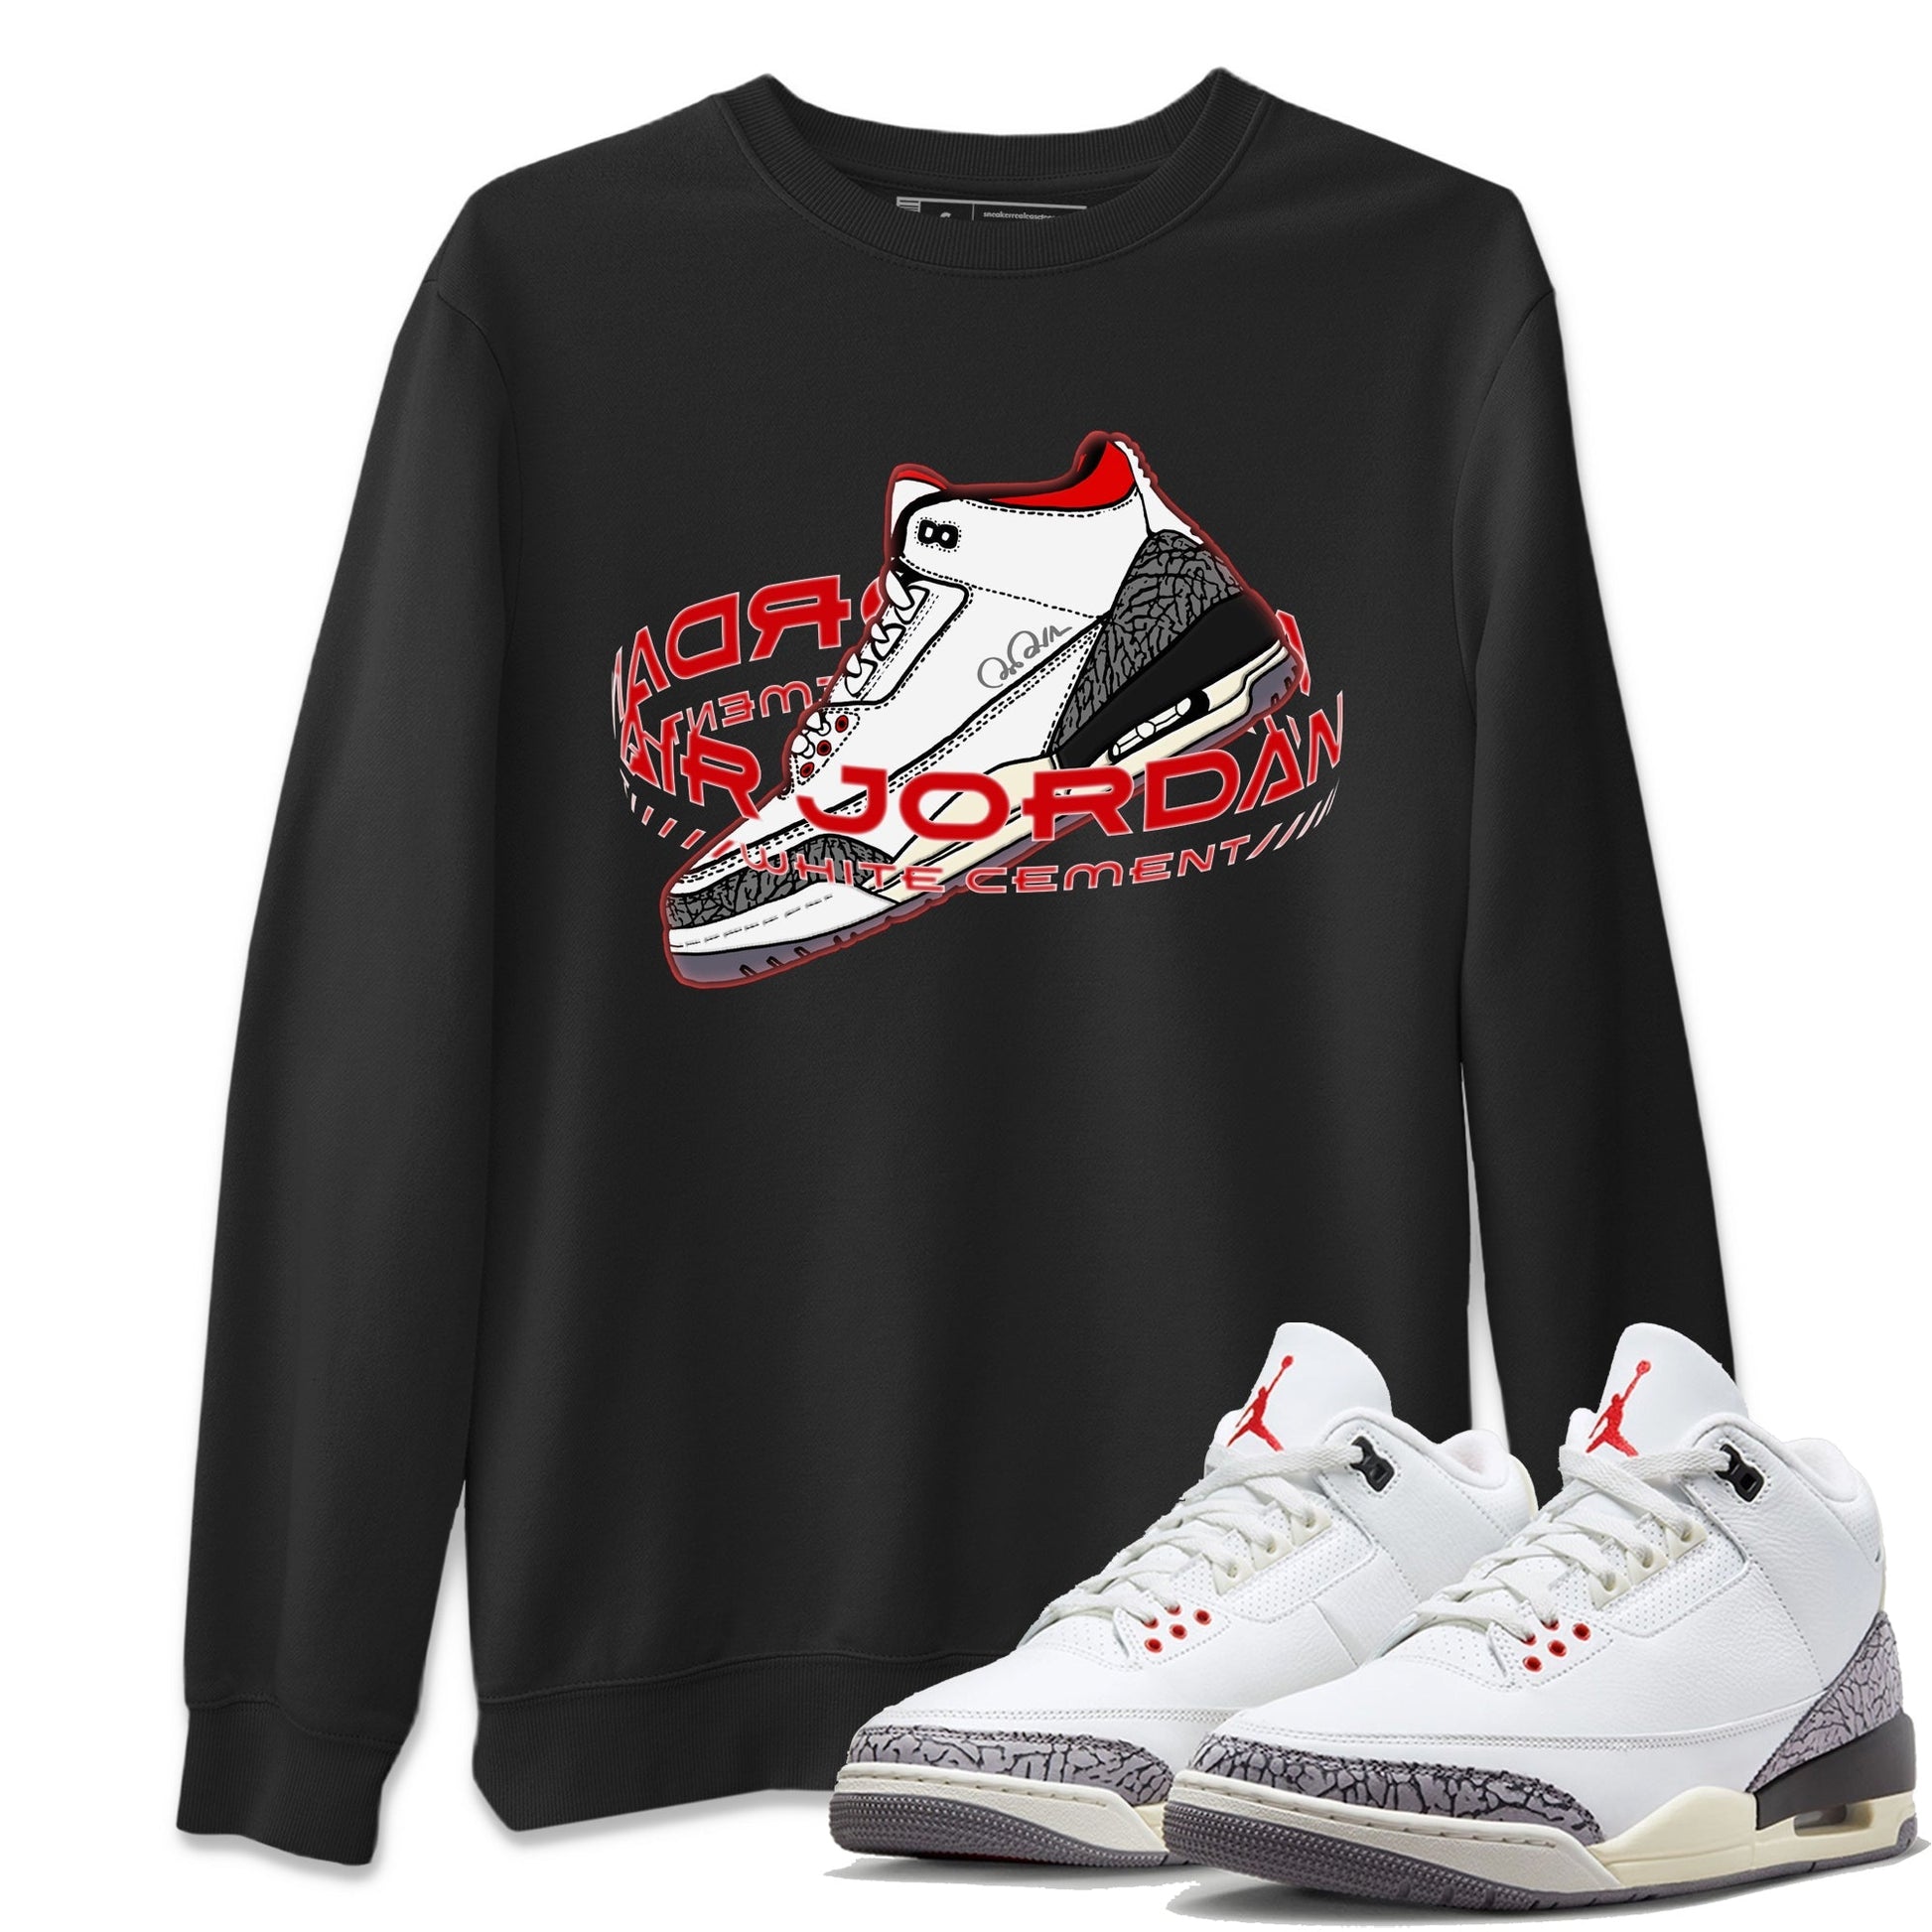 Air Jordan 3 White Cement Warping Space Crew Neck Sneaker Tees AJ3 White Cement Sneaker T-Shirts Washing and Care Tip